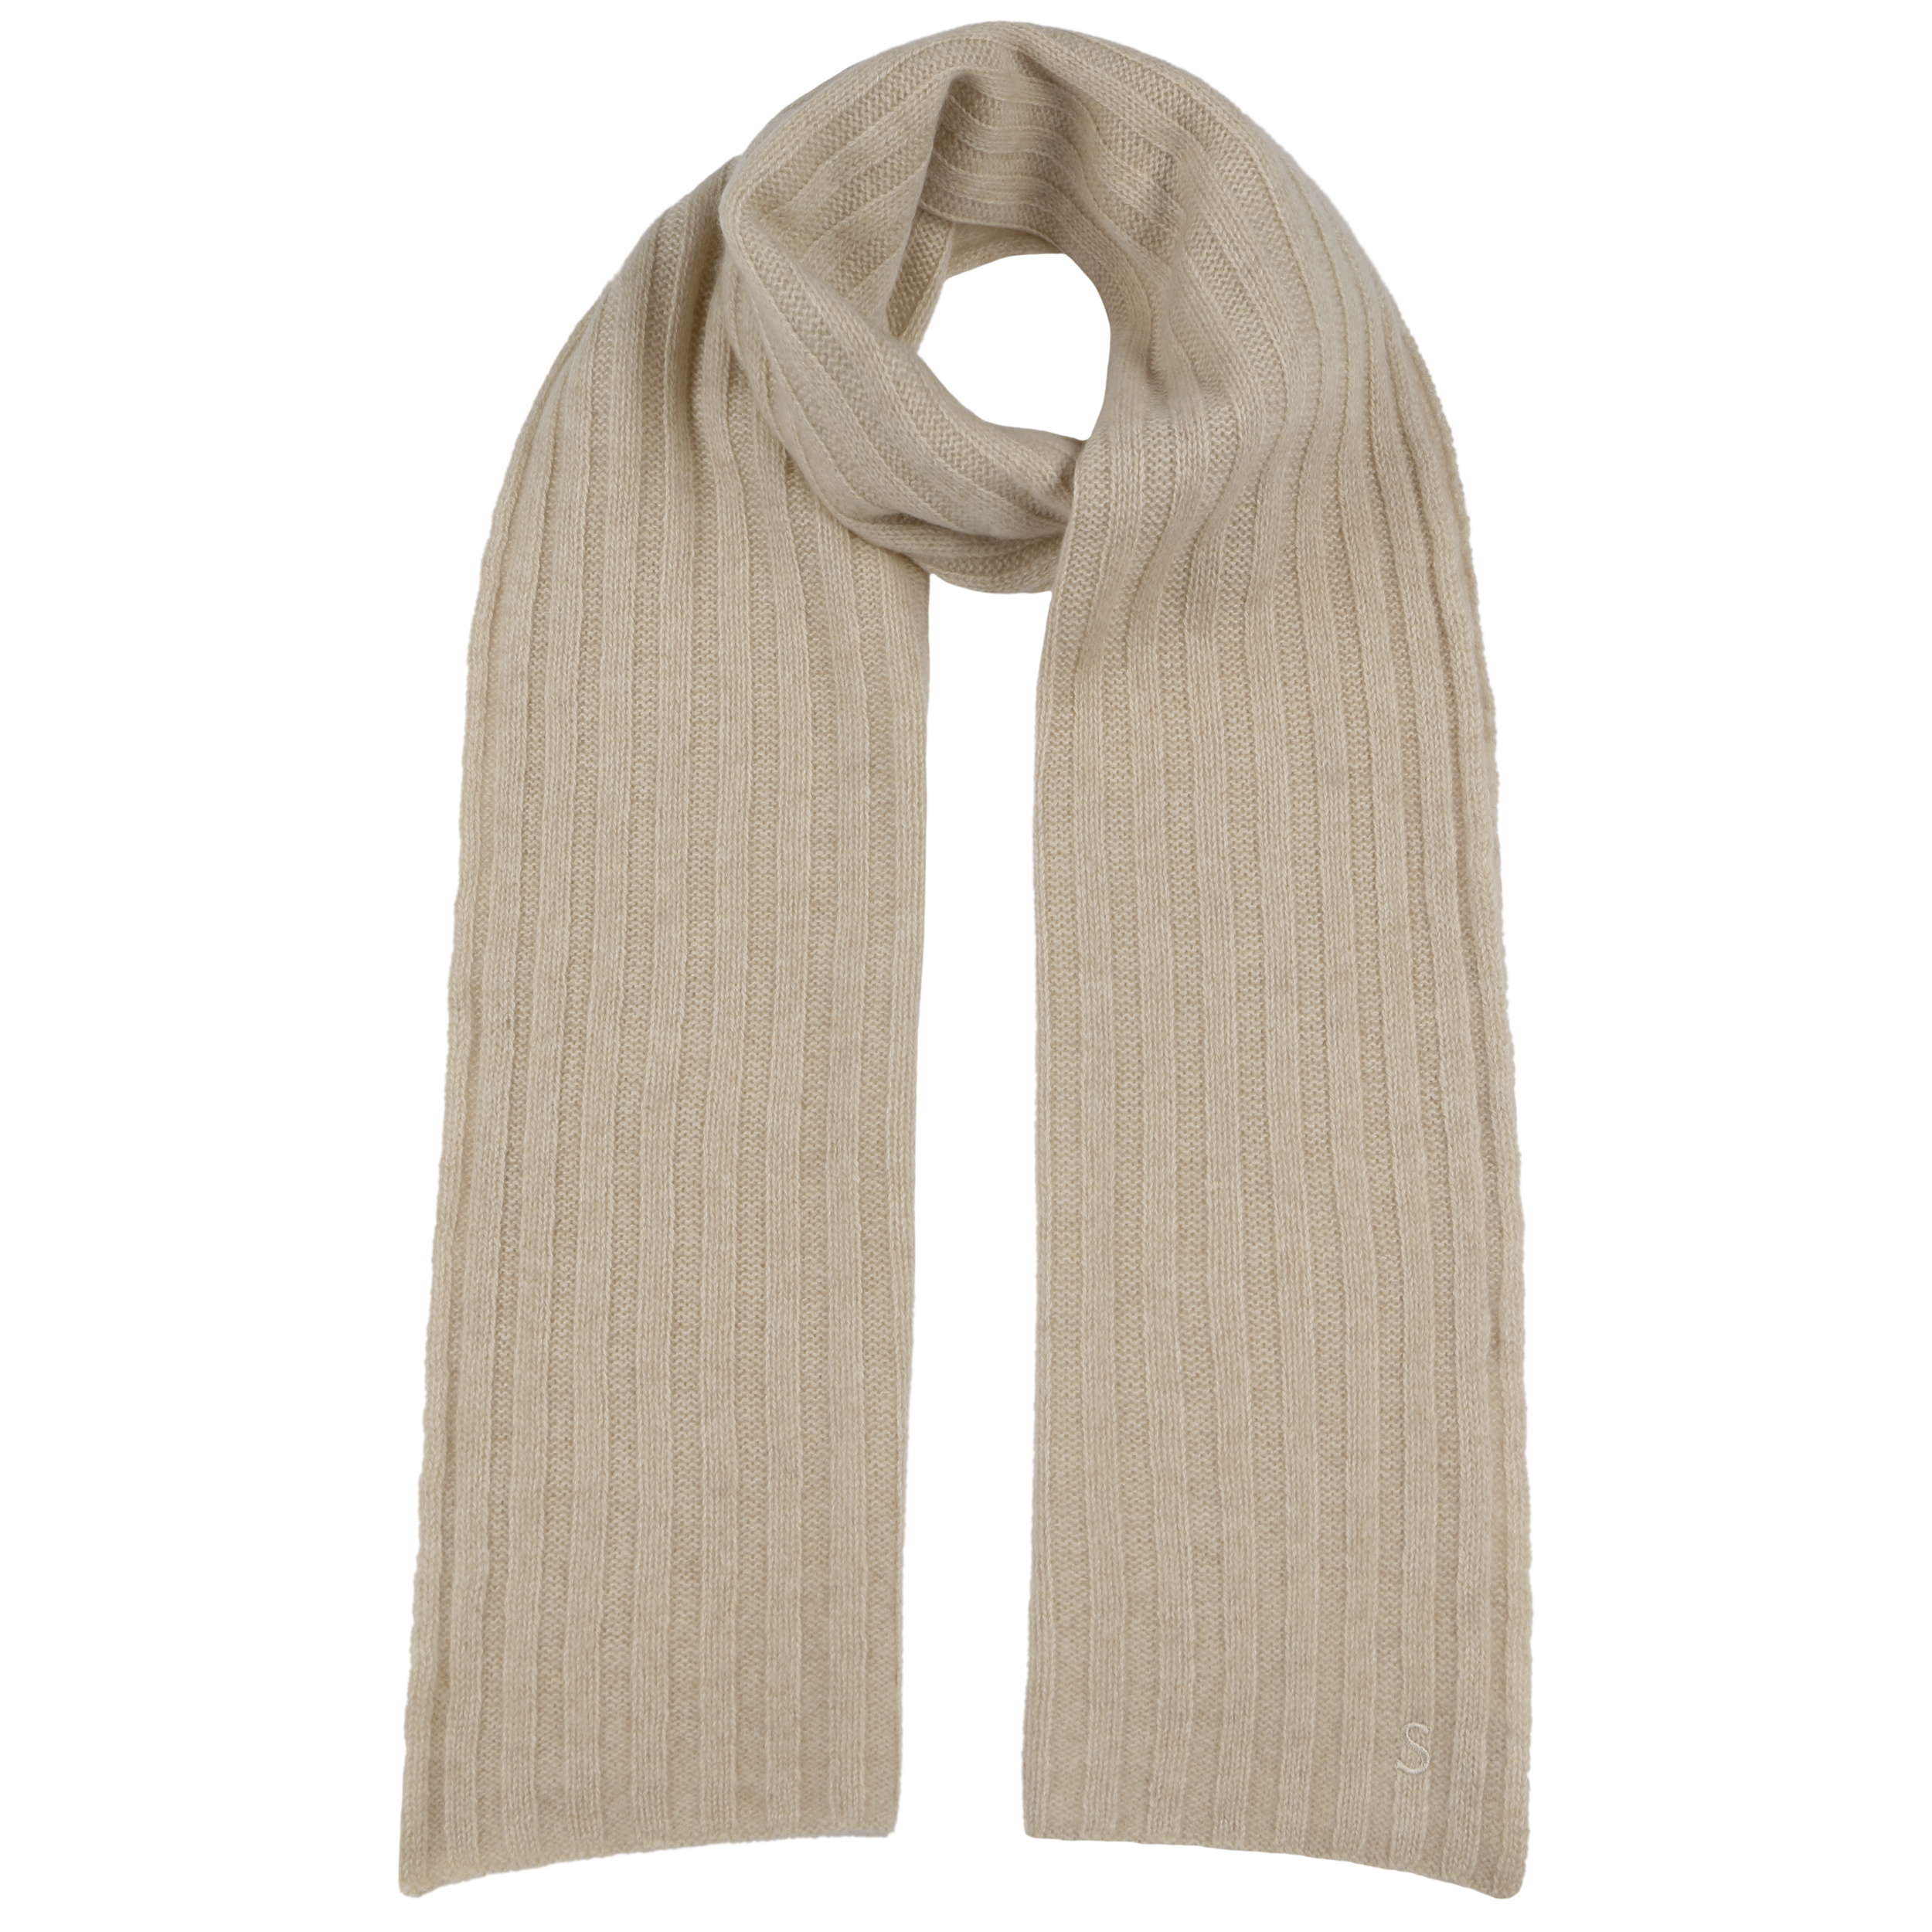 Stetson Yescott Sustainable Cashmere Scarf Oatmeal One Size